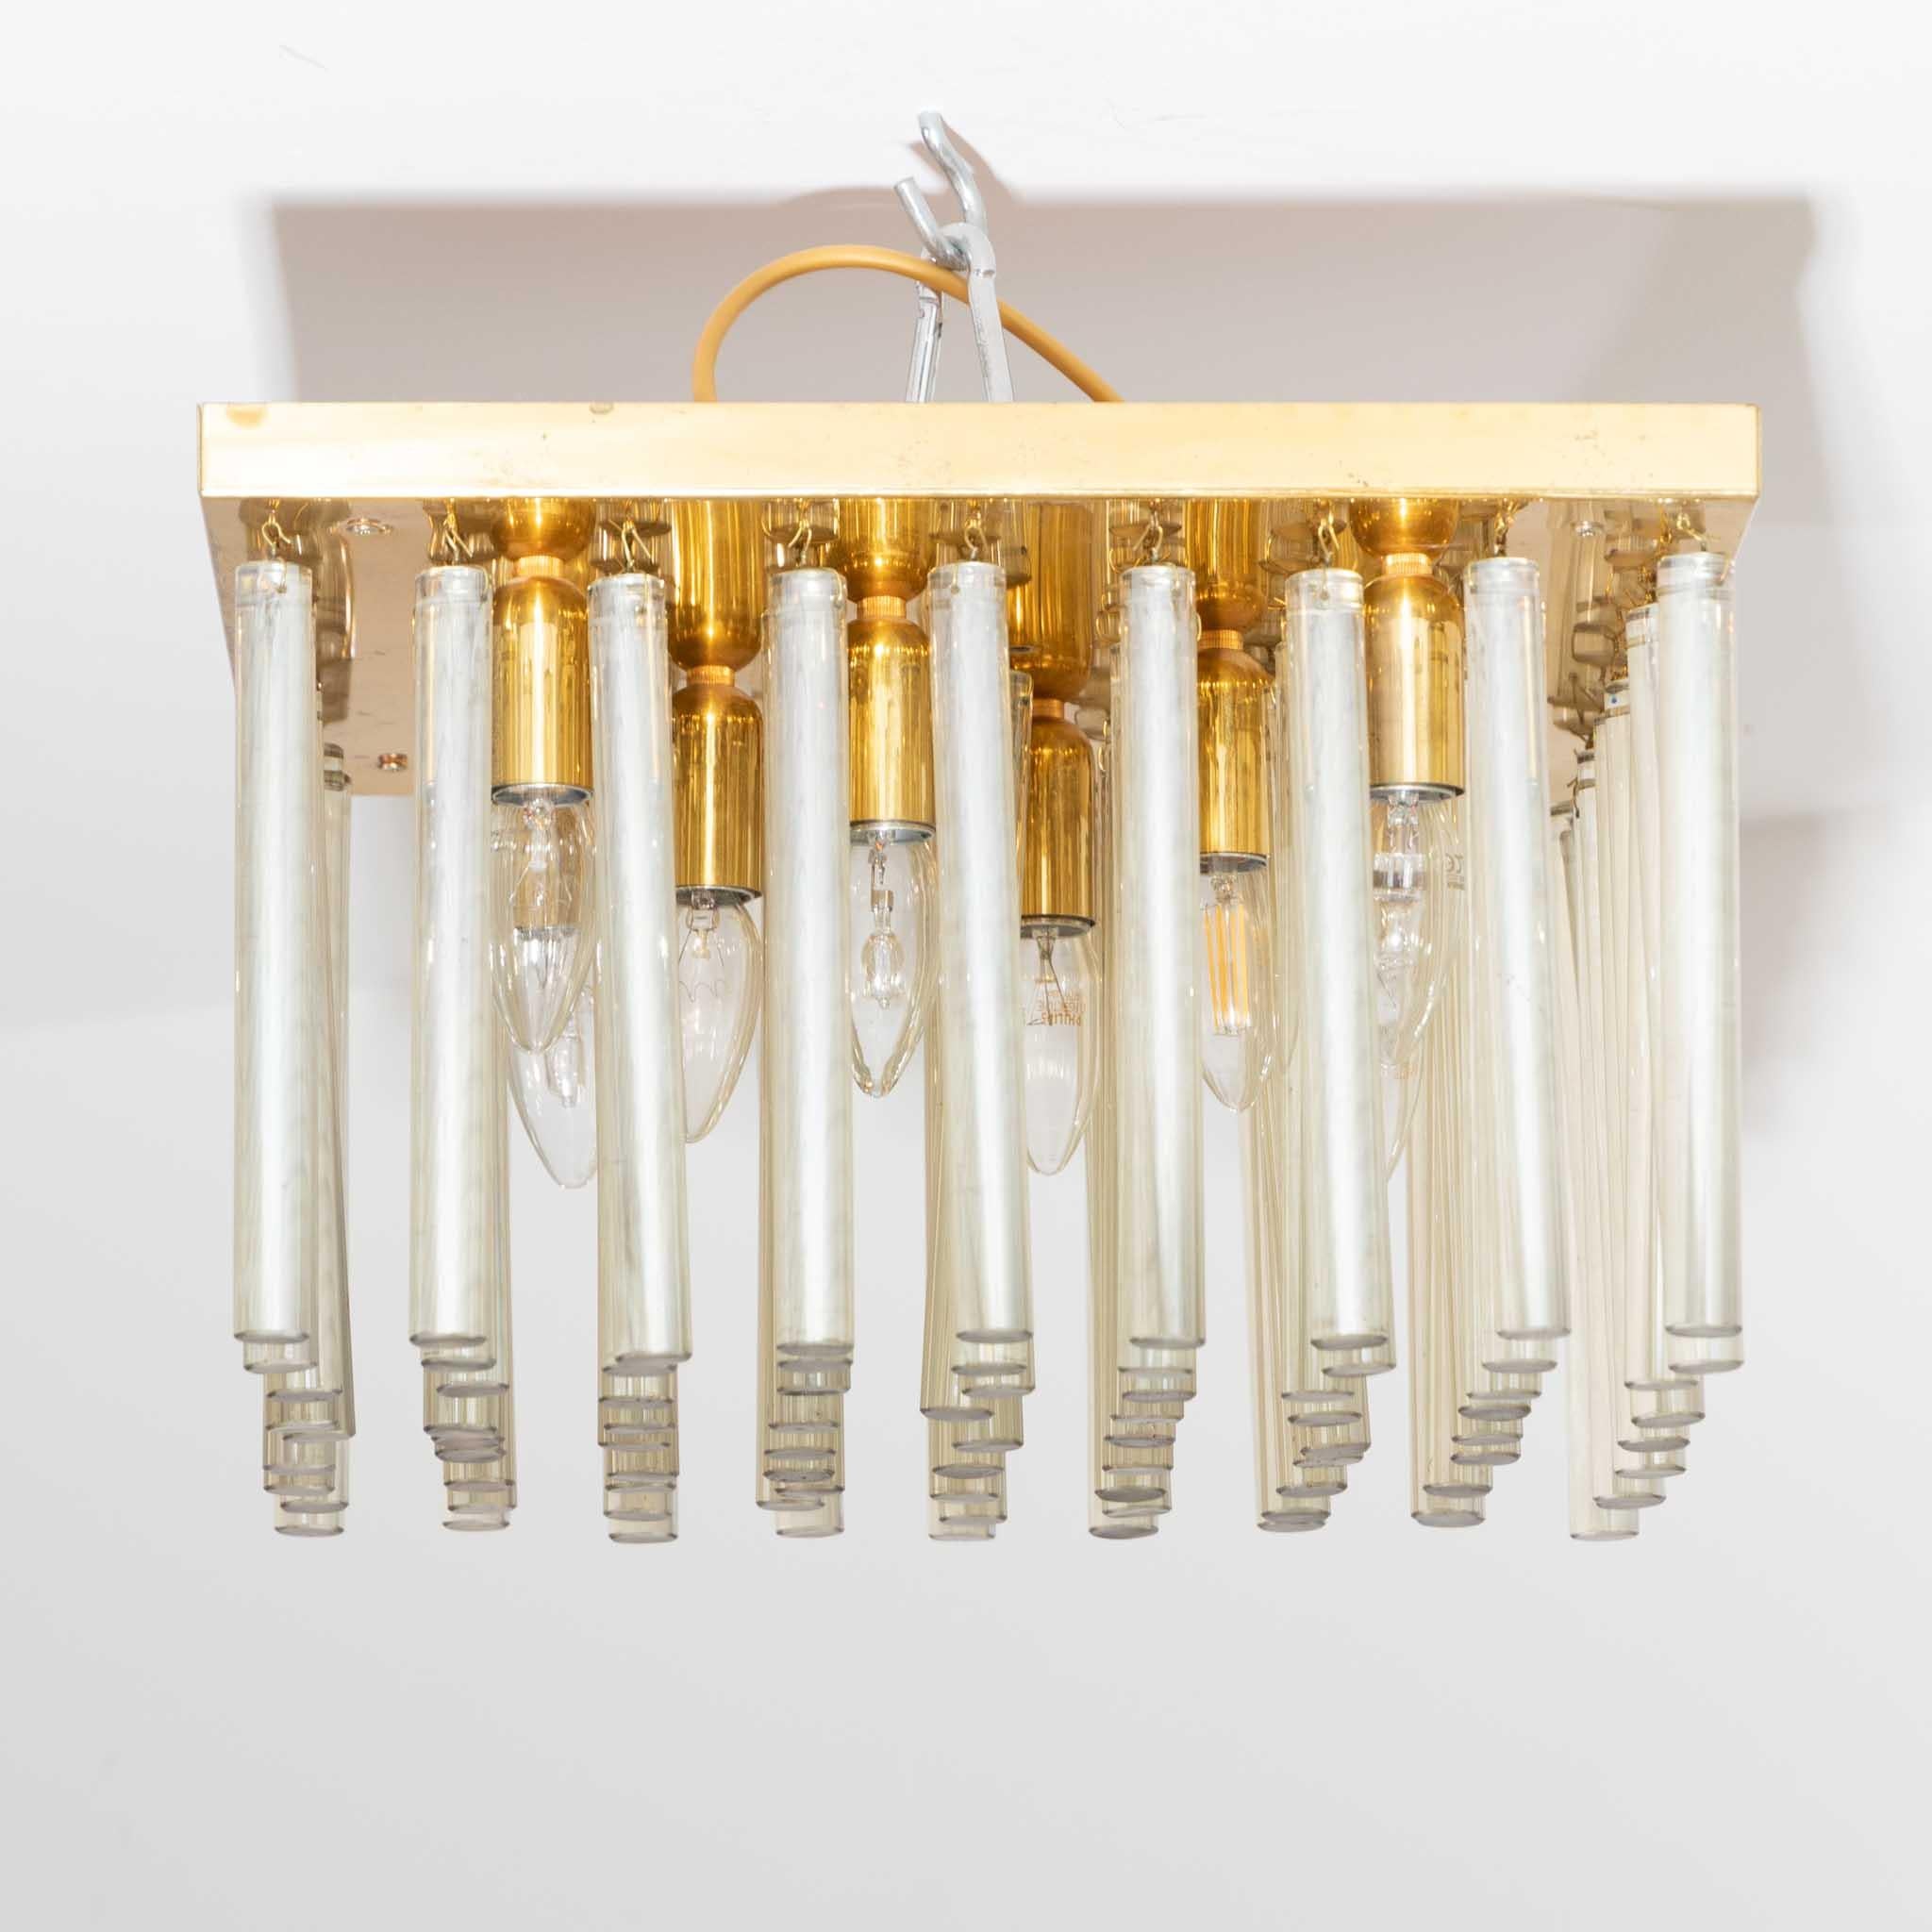 Ceiling chandelier with Tondo-shaped glass rods and square base plate in brass.